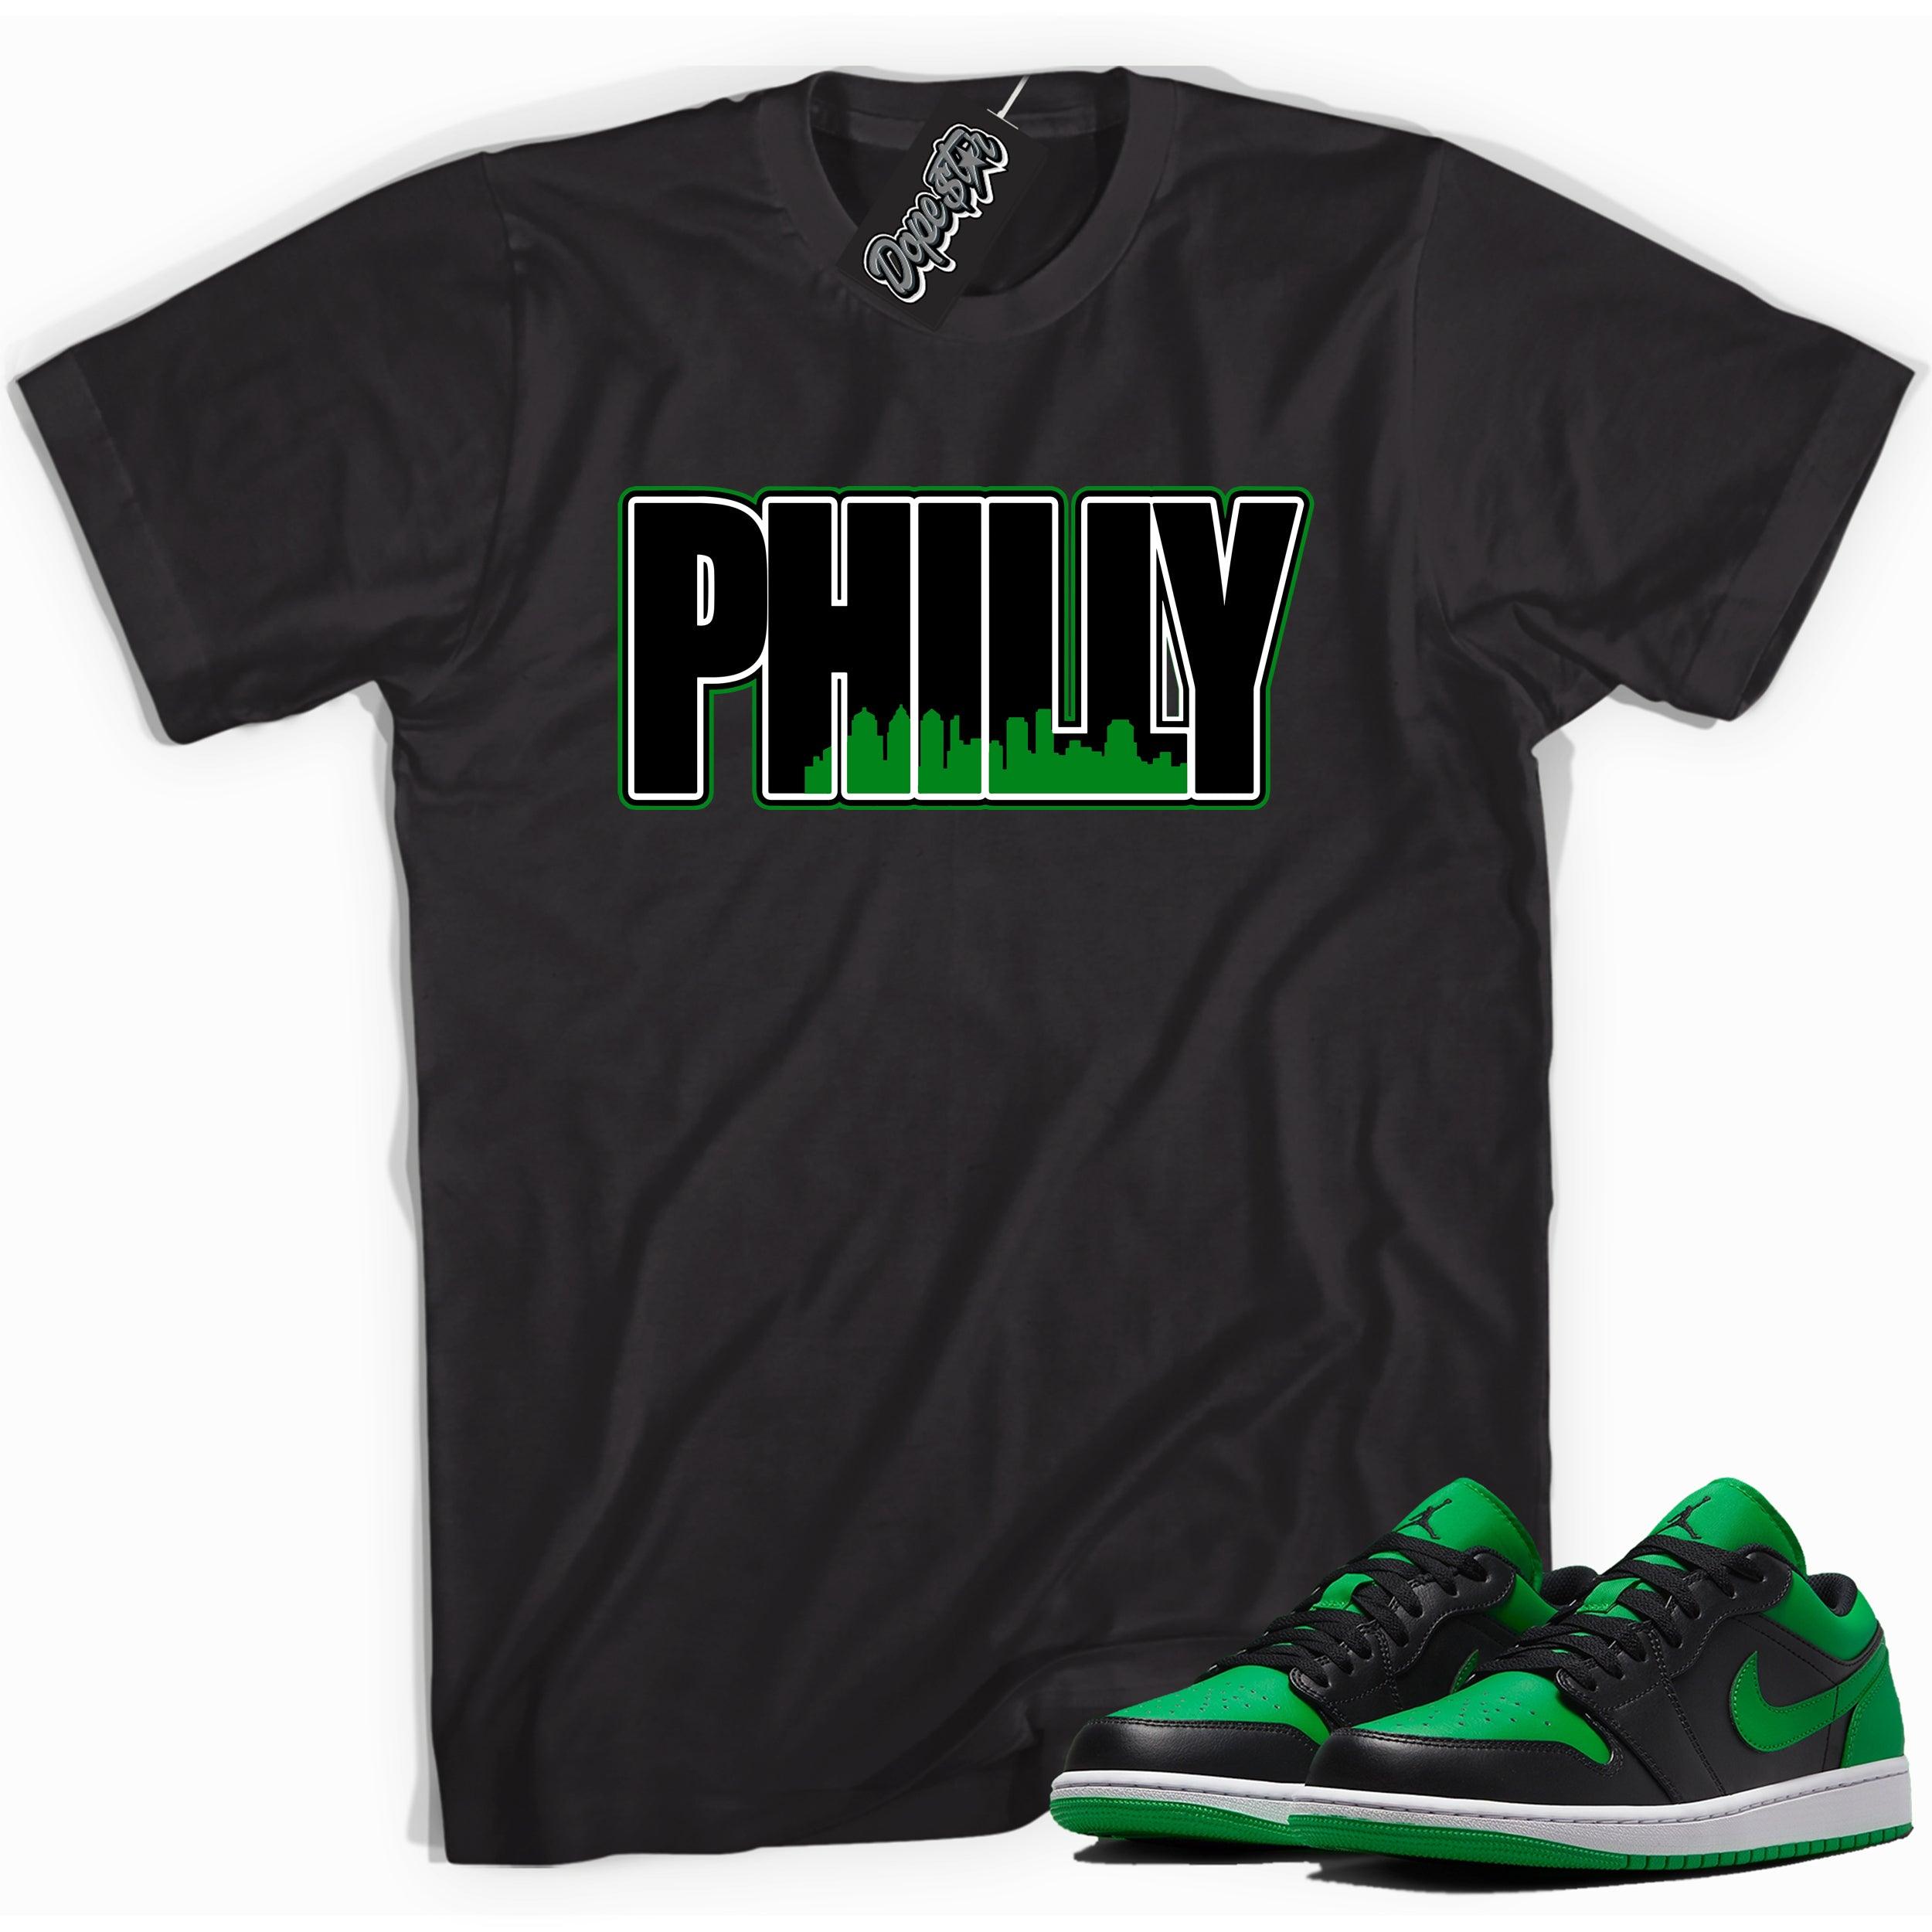 Cool black graphic tee with 'Philly' print, that perfectly matches Air Jordan 1 Low Lucky Green sneakers